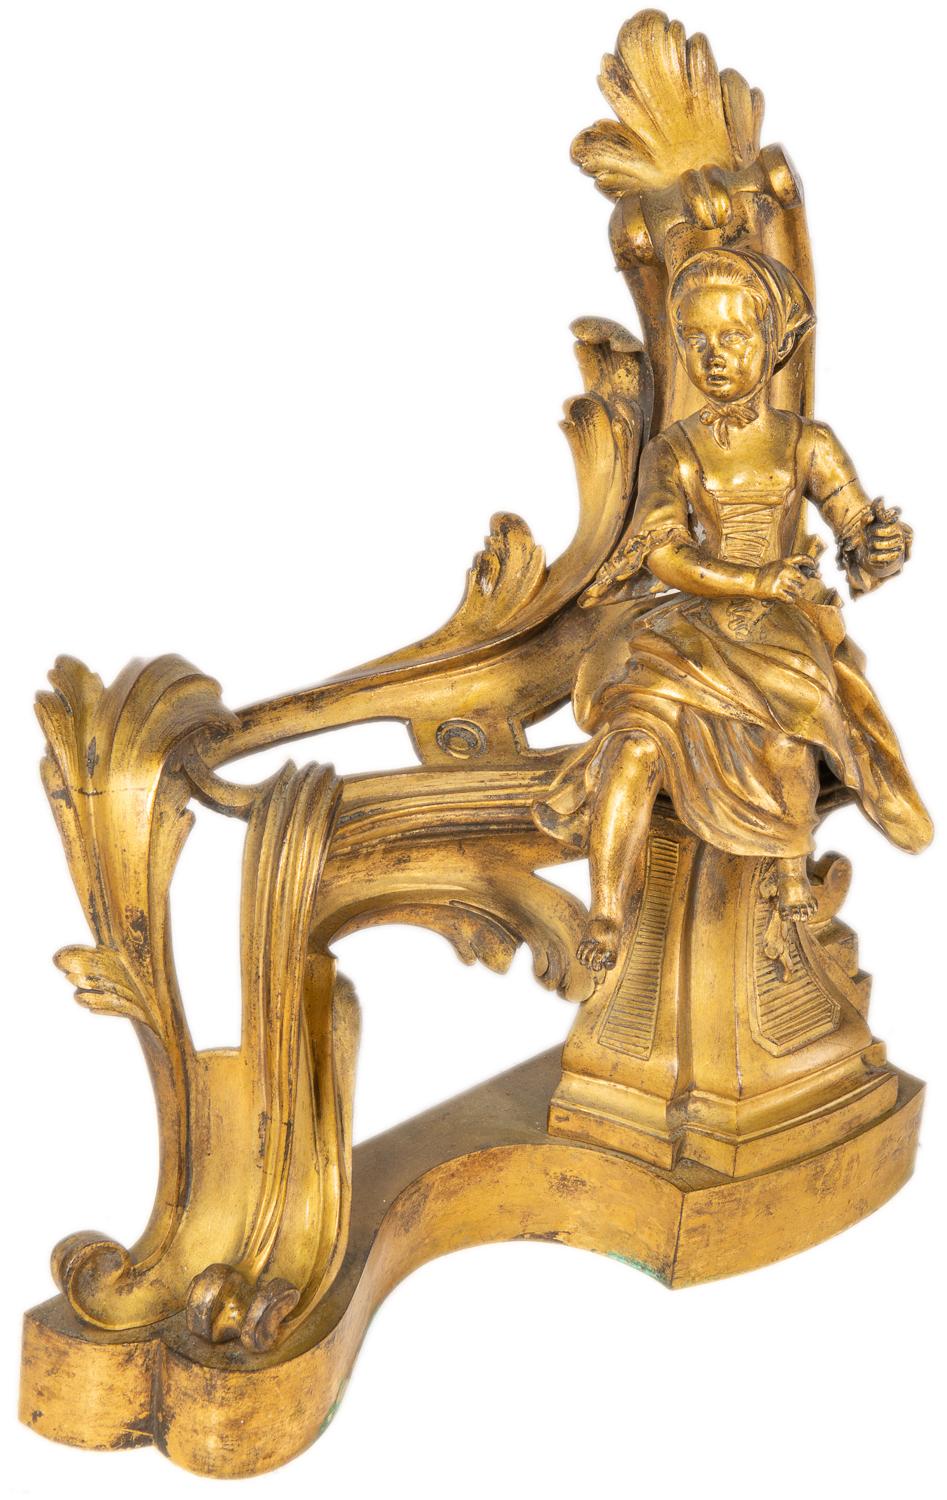 A very good quality pair of classical Rococo style 19th century French gilded ormolu chenets, each with scrolling foliate decoration with a young boy and girl seated.